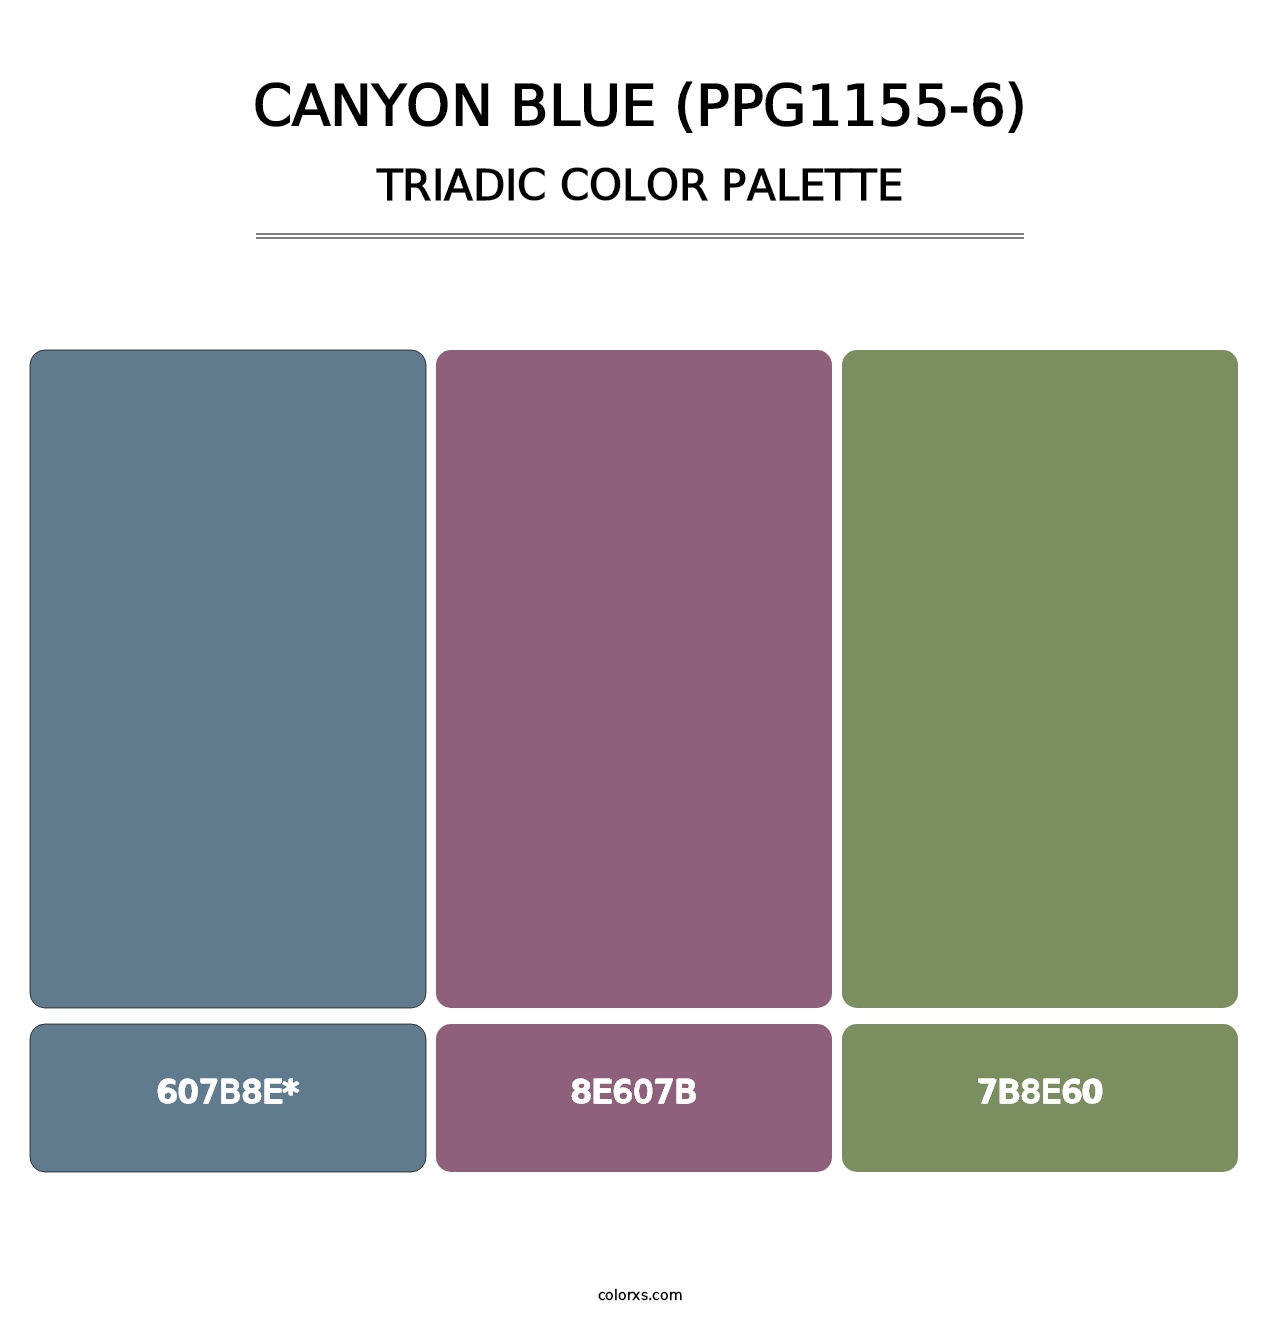 Canyon Blue (PPG1155-6) - Triadic Color Palette